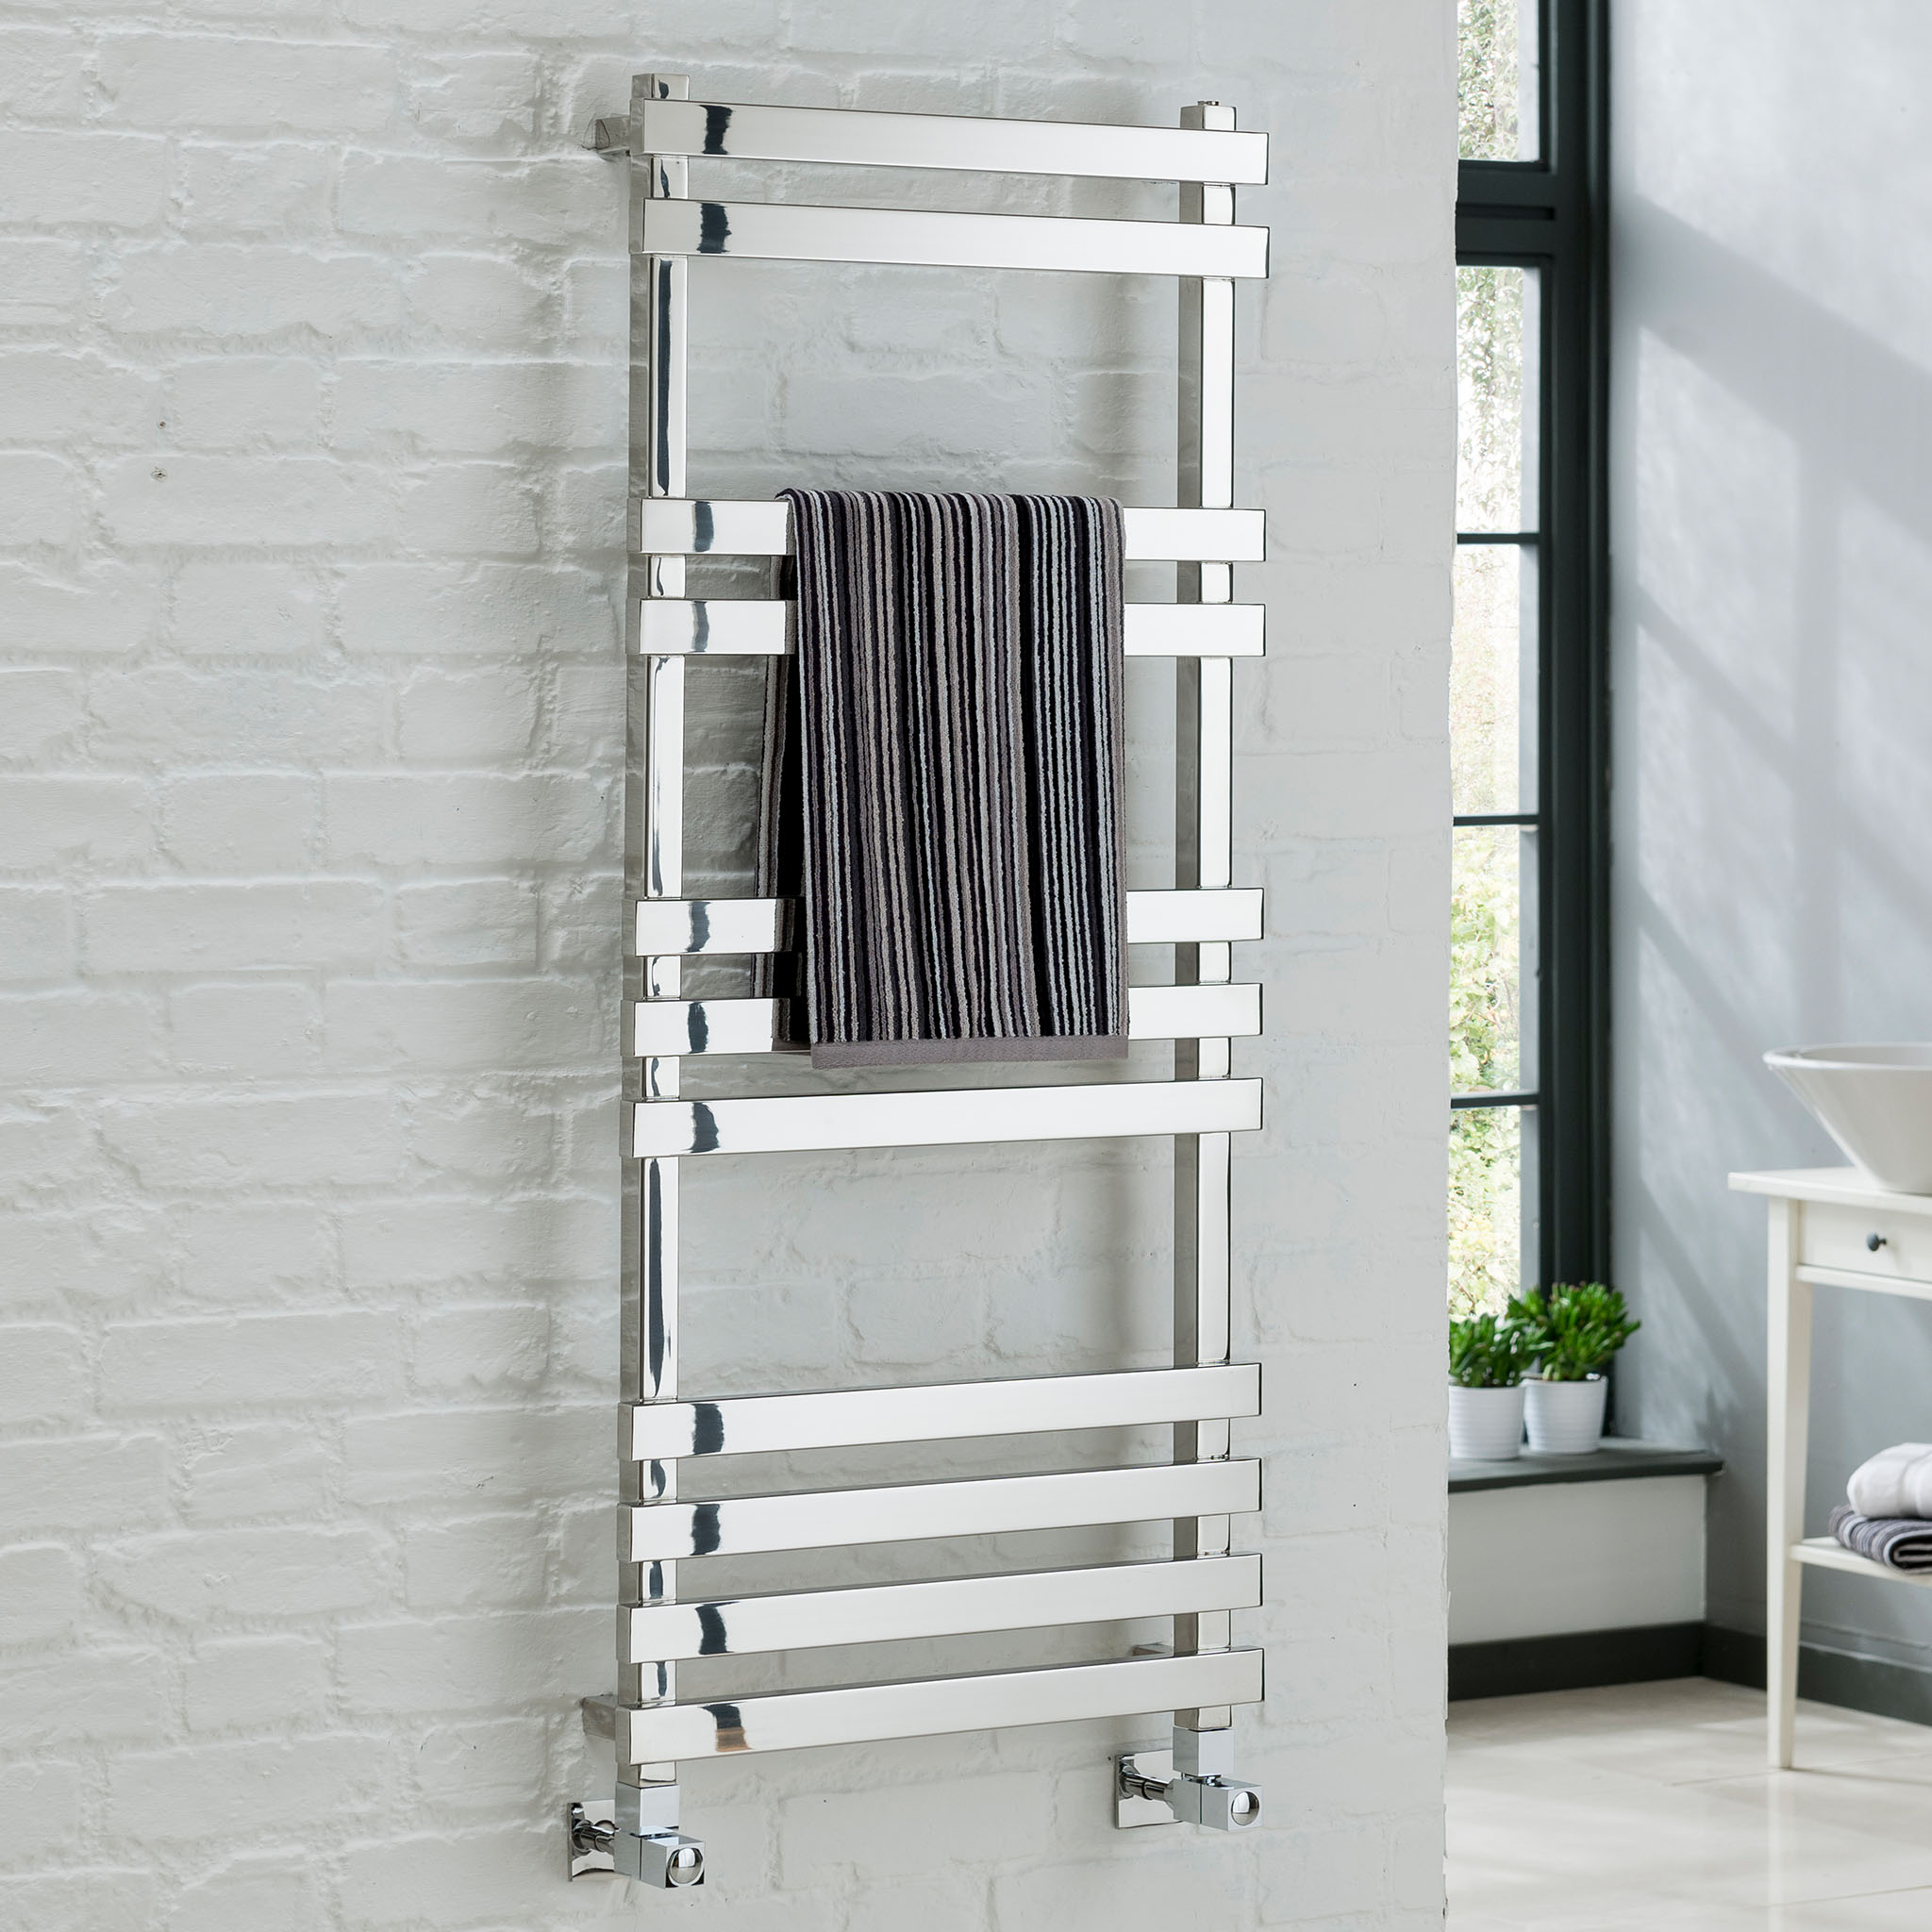 Vogue Gallant Wall Mounted Heated Towel Rail